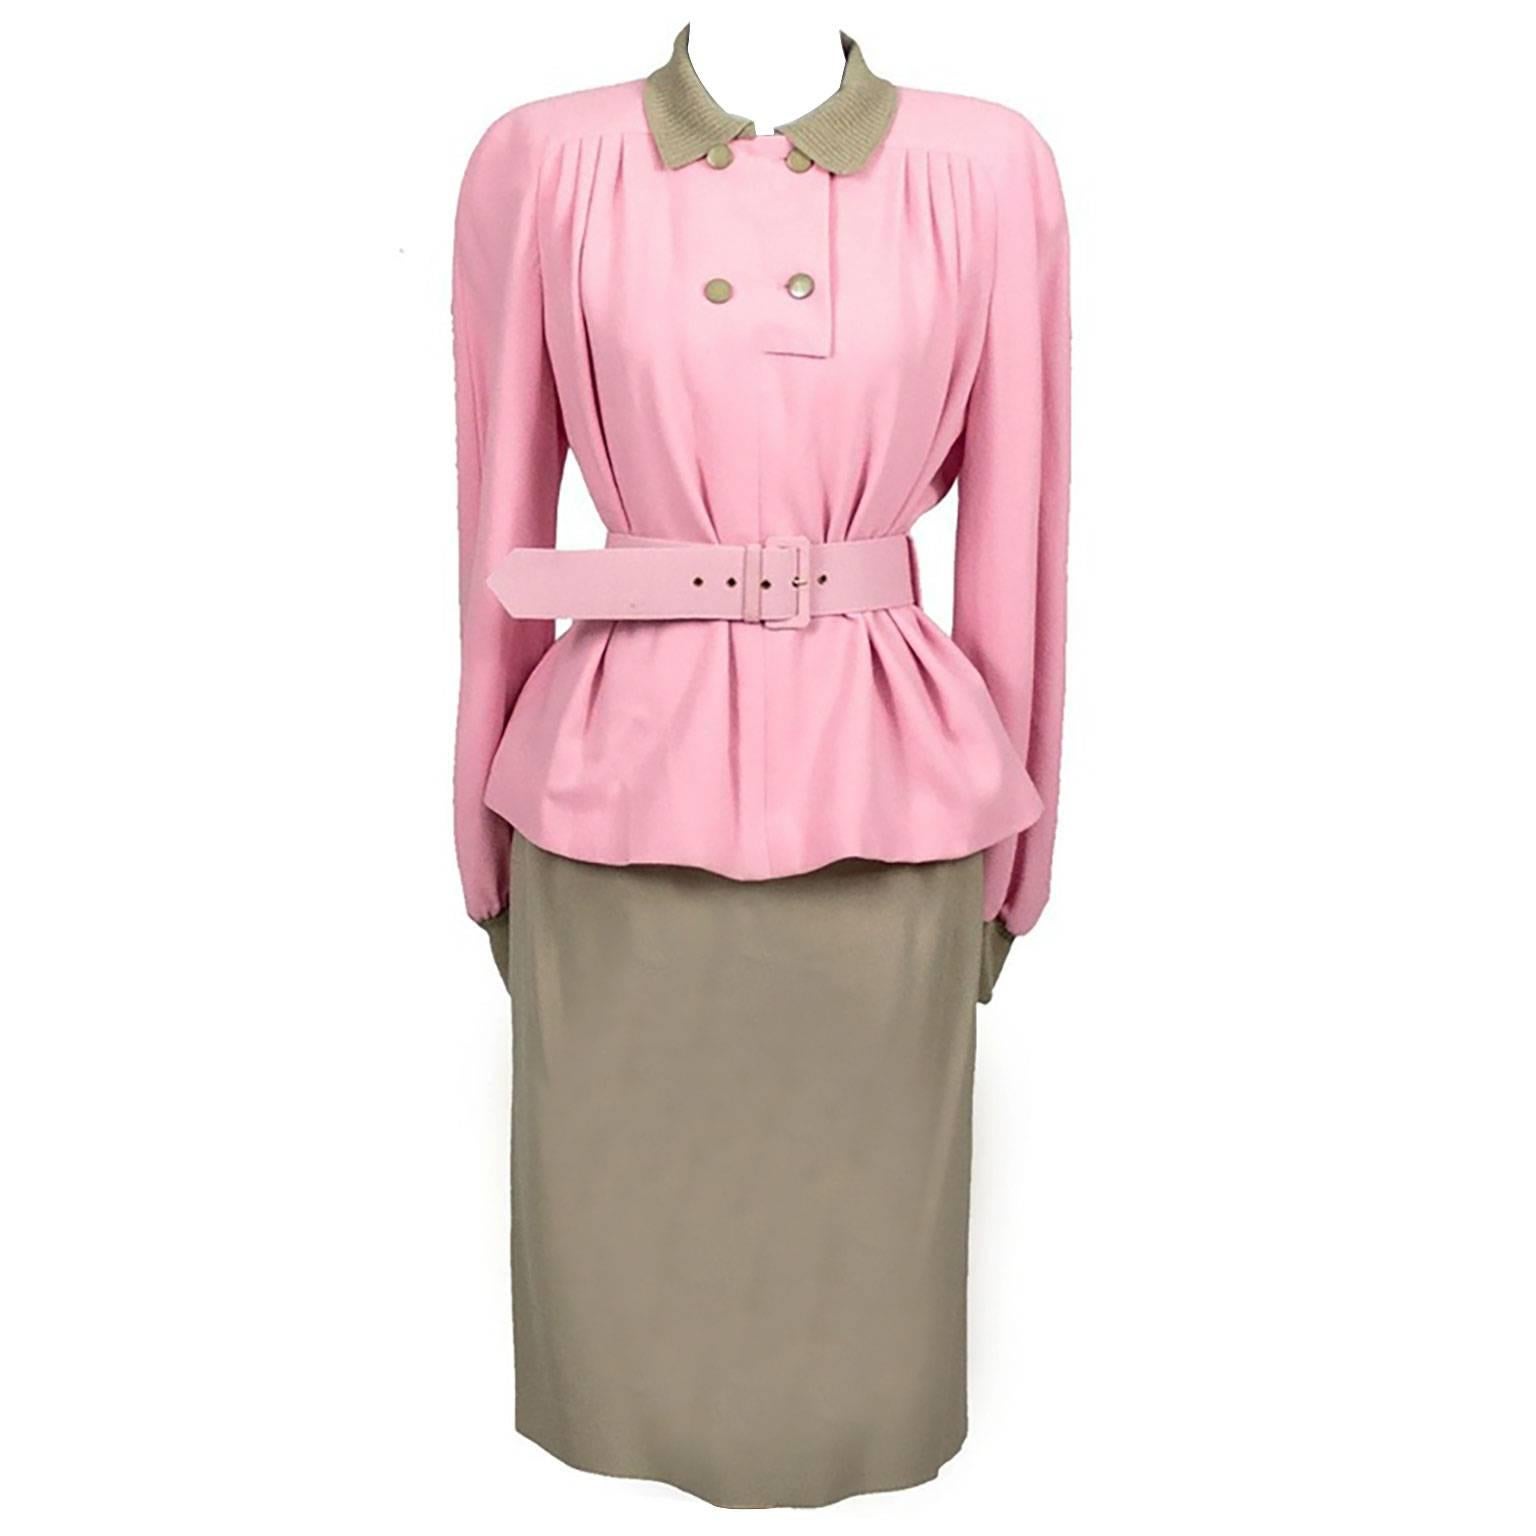 1984 Runway Vintage Valentino Boutique 2pc Skirt Top Outfit Pink & Camel Size 8